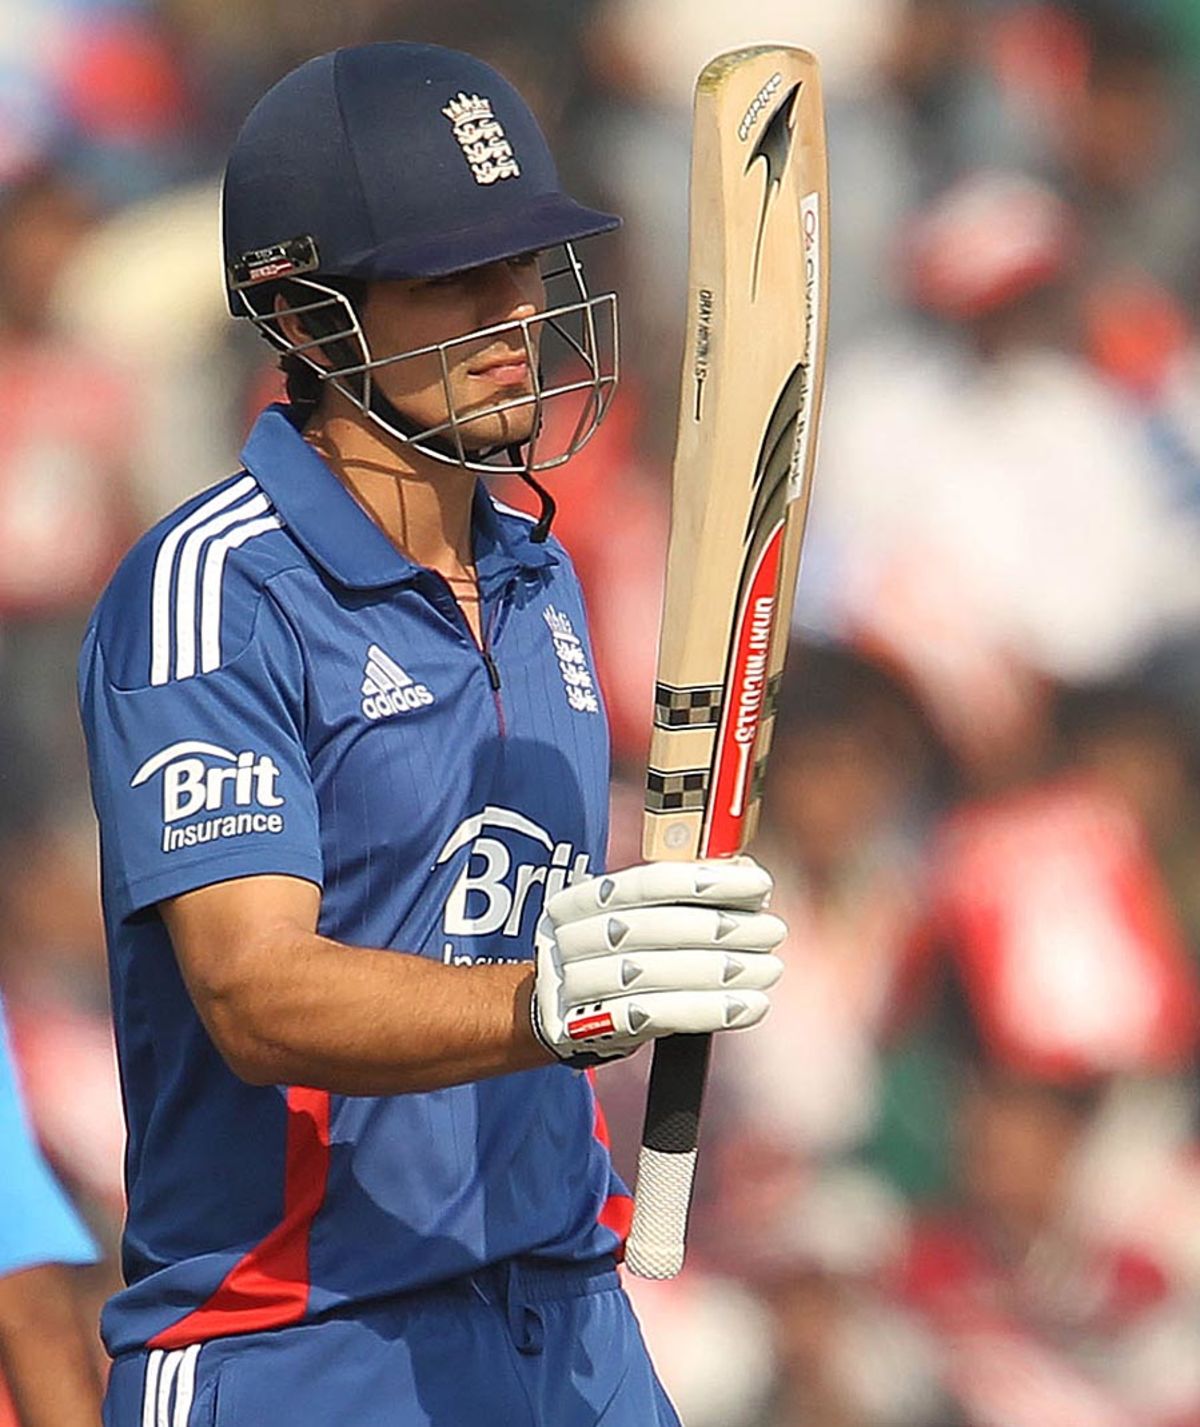 Alastair Cook raises hit bat after scoring a patient half-century, India v England, 4th ODI, Mohali, January 23, 2013